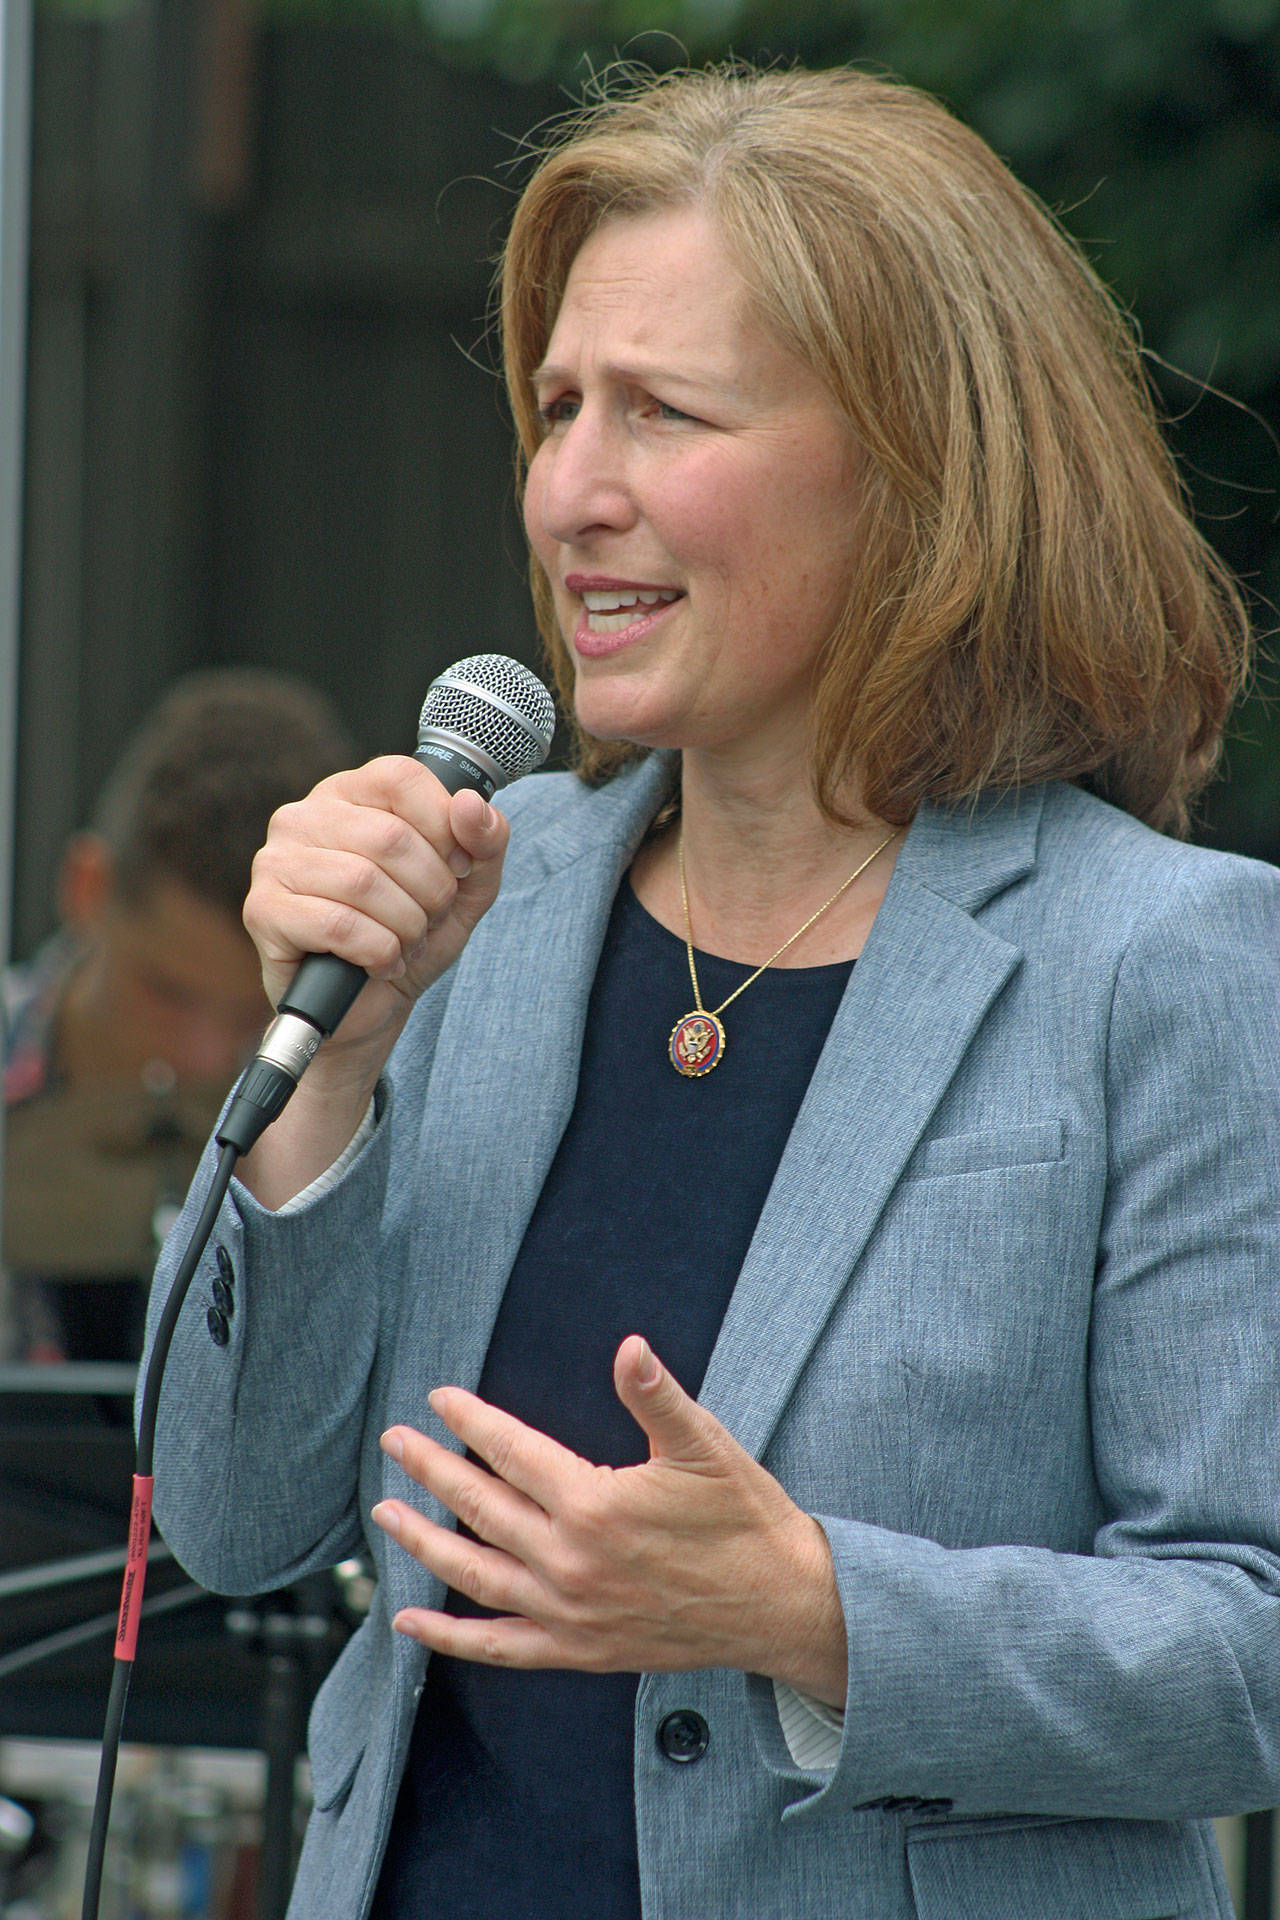 U.S. Rep. Kim Schrier, D-Wash., speaks to a gathering outside HealthPoint Auburn North on Thursday afternoon. The Congresswoman talked about the importance of childhood immunizations. MARK KLAAS, Auburn Reporter